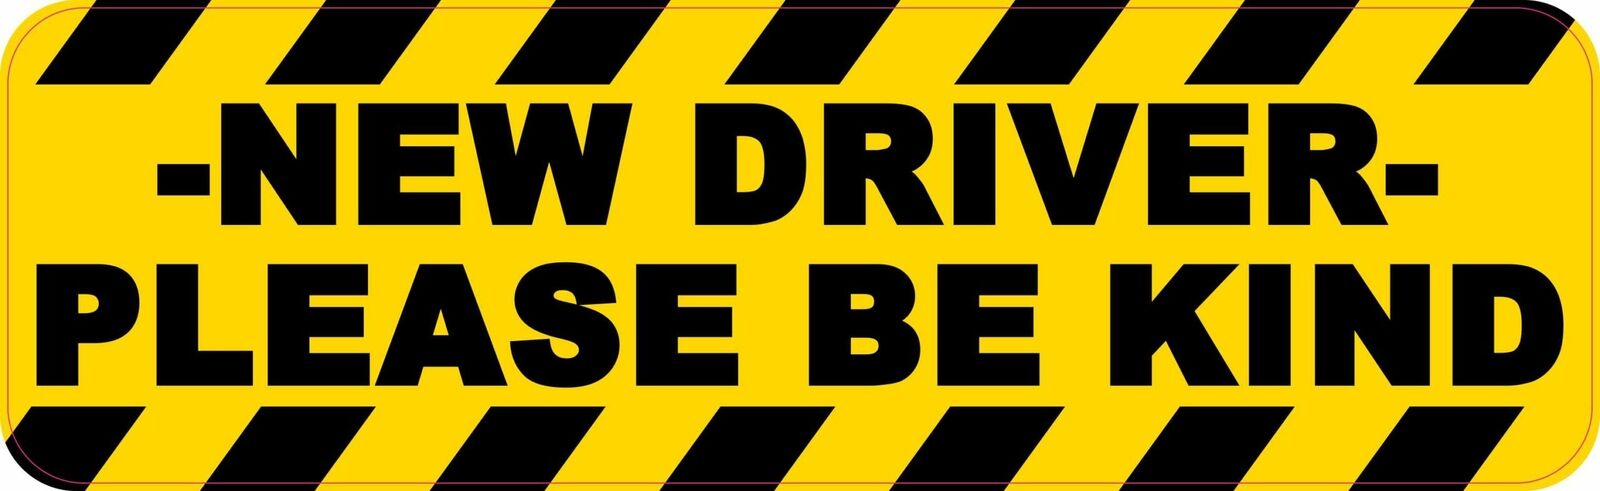 10in x 3in Please Be Kind New Driver Magnet Car Truck Vehicle Magnetic Sign